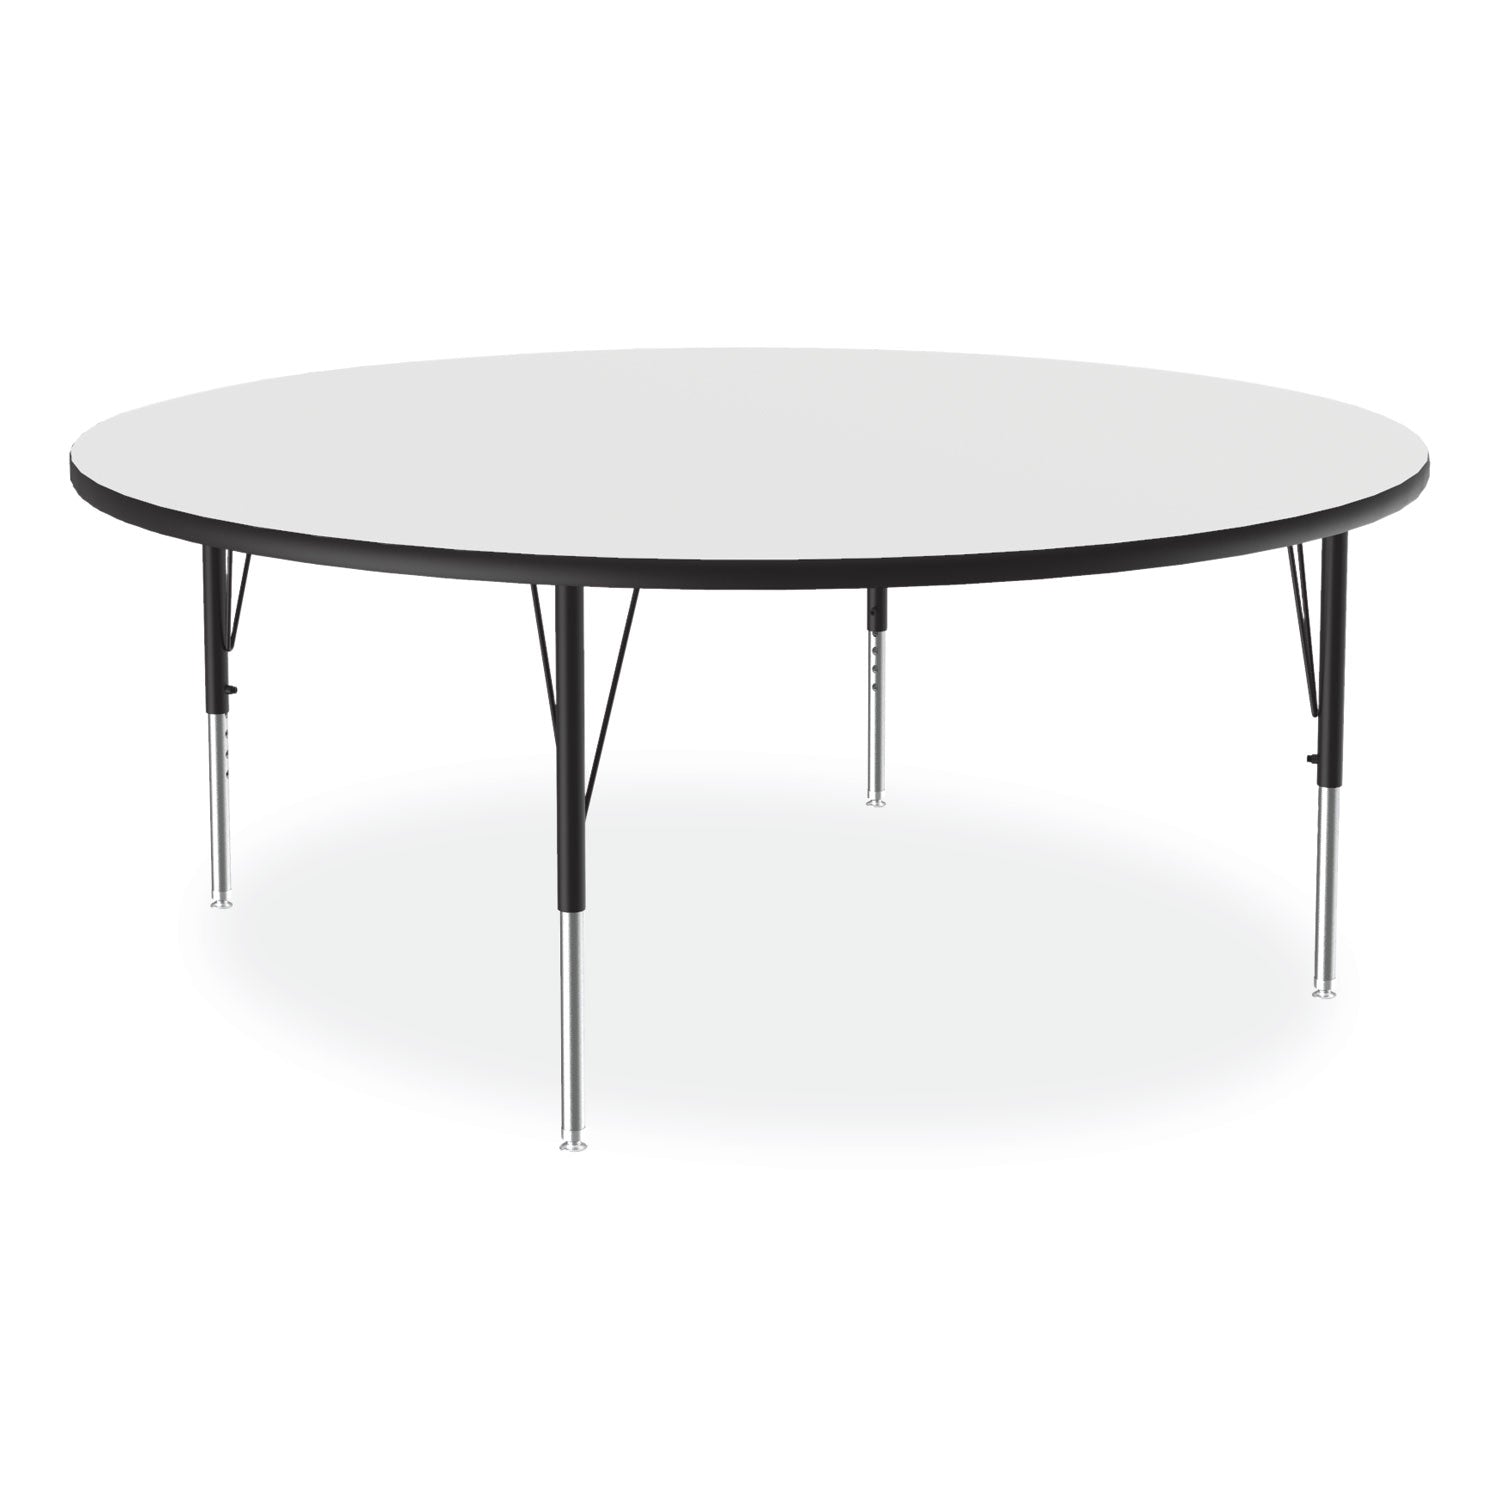 Markerboard Activity Tables, Round, 60